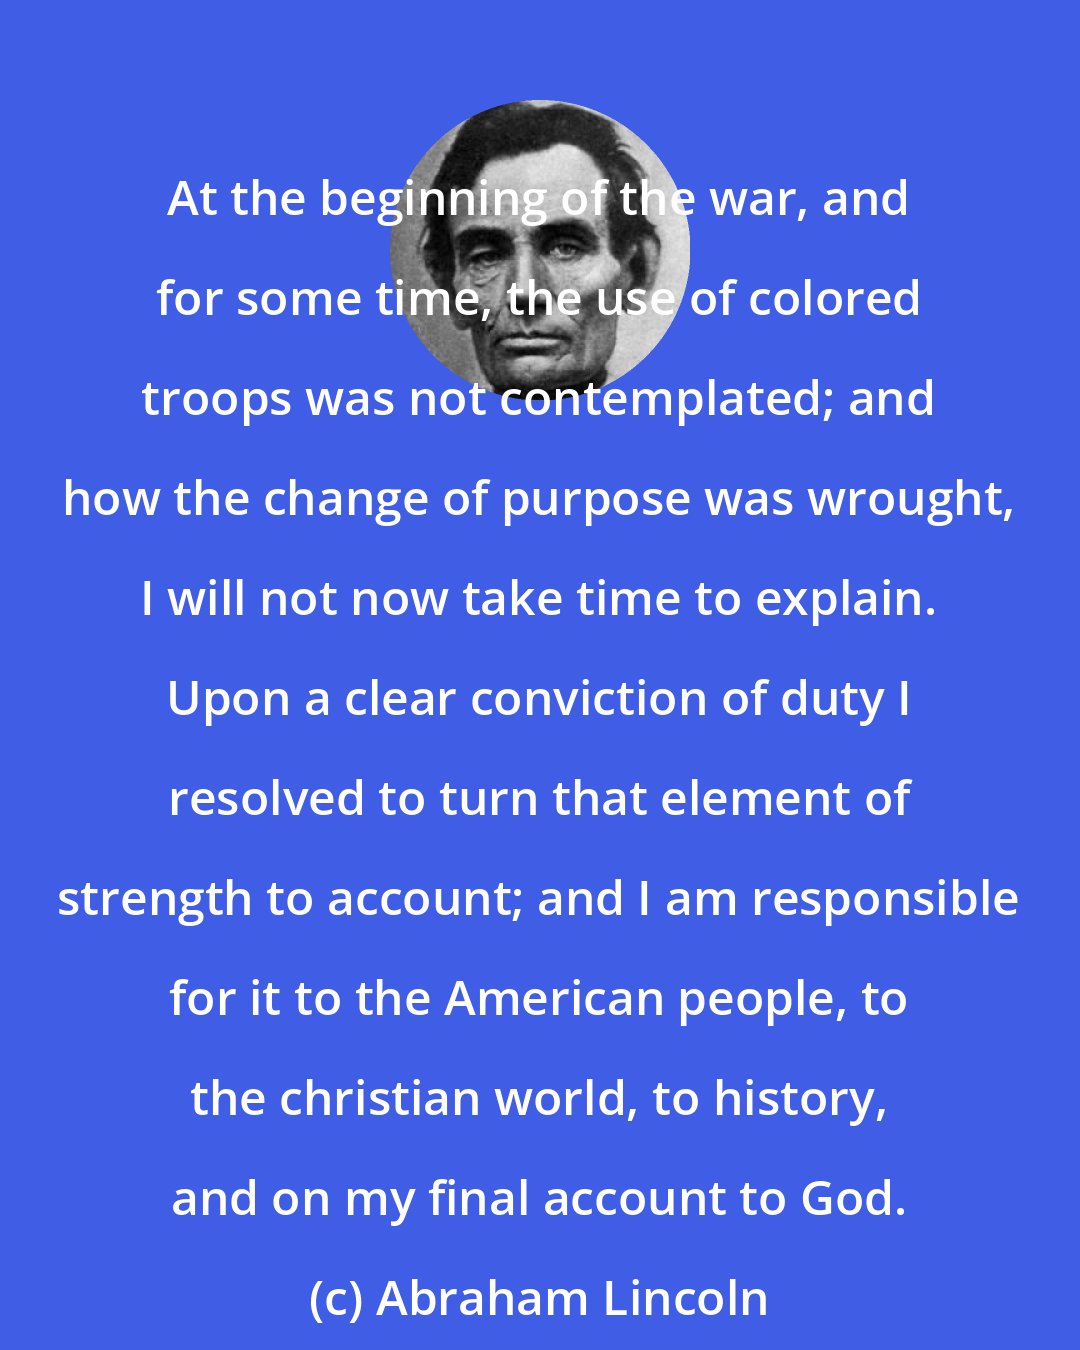 Abraham Lincoln: At the beginning of the war, and for some time, the use of colored troops was not contemplated; and how the change of purpose was wrought, I will not now take time to explain. Upon a clear conviction of duty I resolved to turn that element of strength to account; and I am responsible for it to the American people, to the christian world, to history, and on my final account to God.